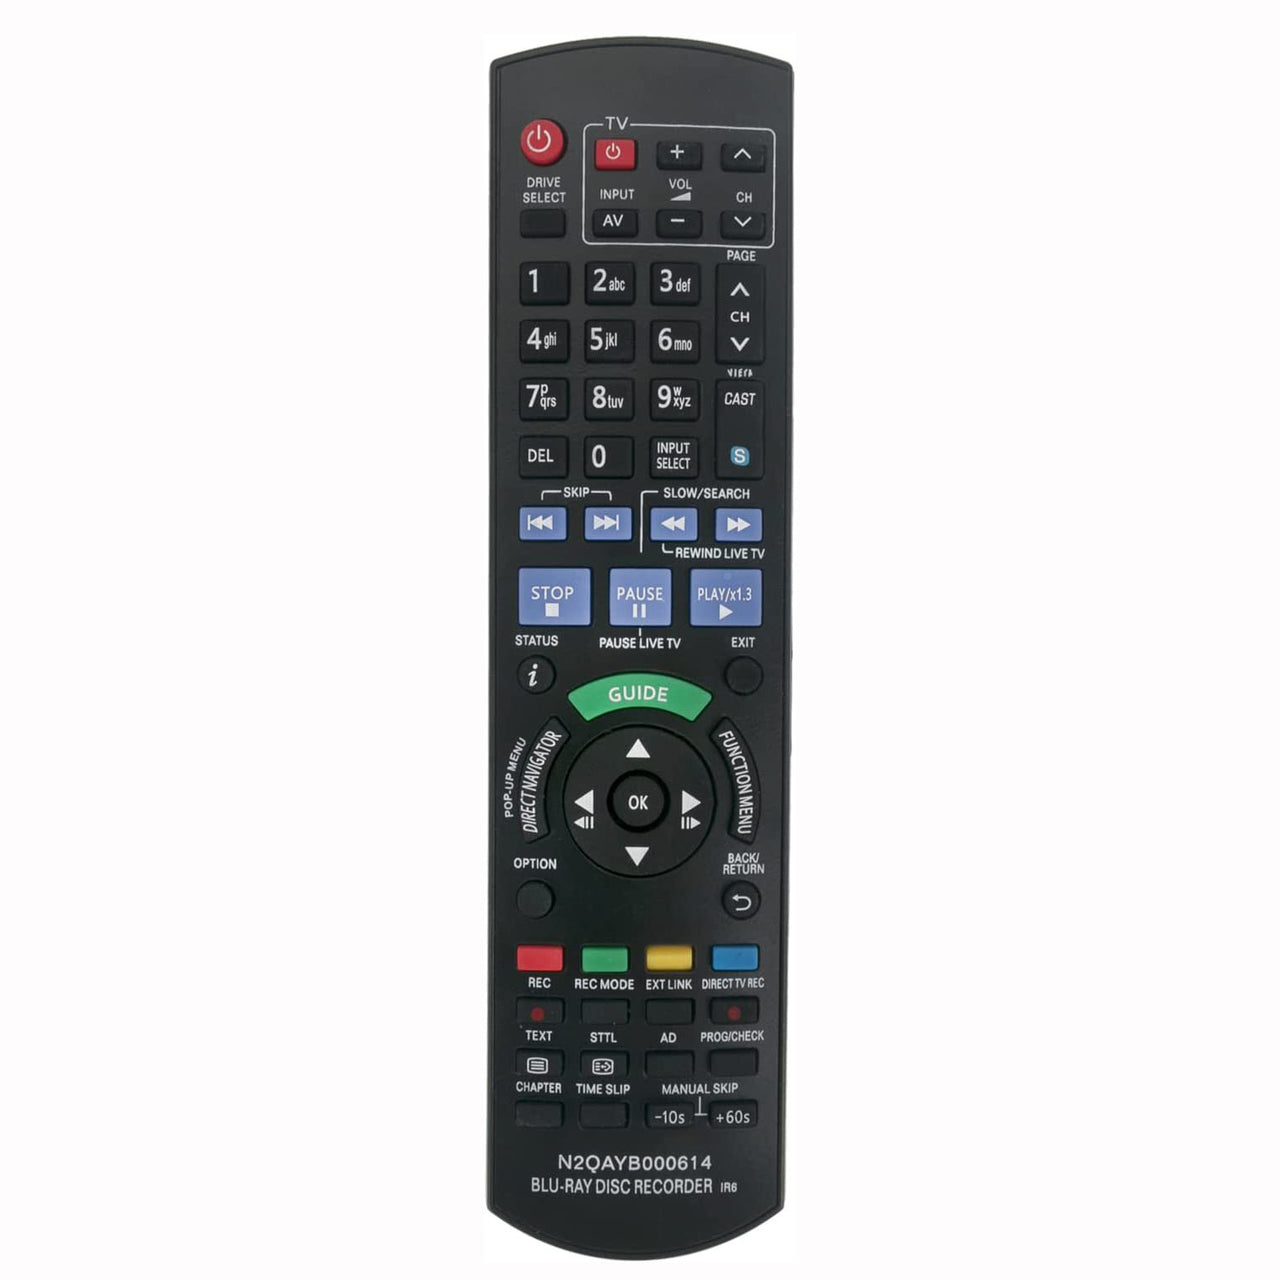 N2QAYB000614 Replacement Remote for Panasonic DVD Recorder